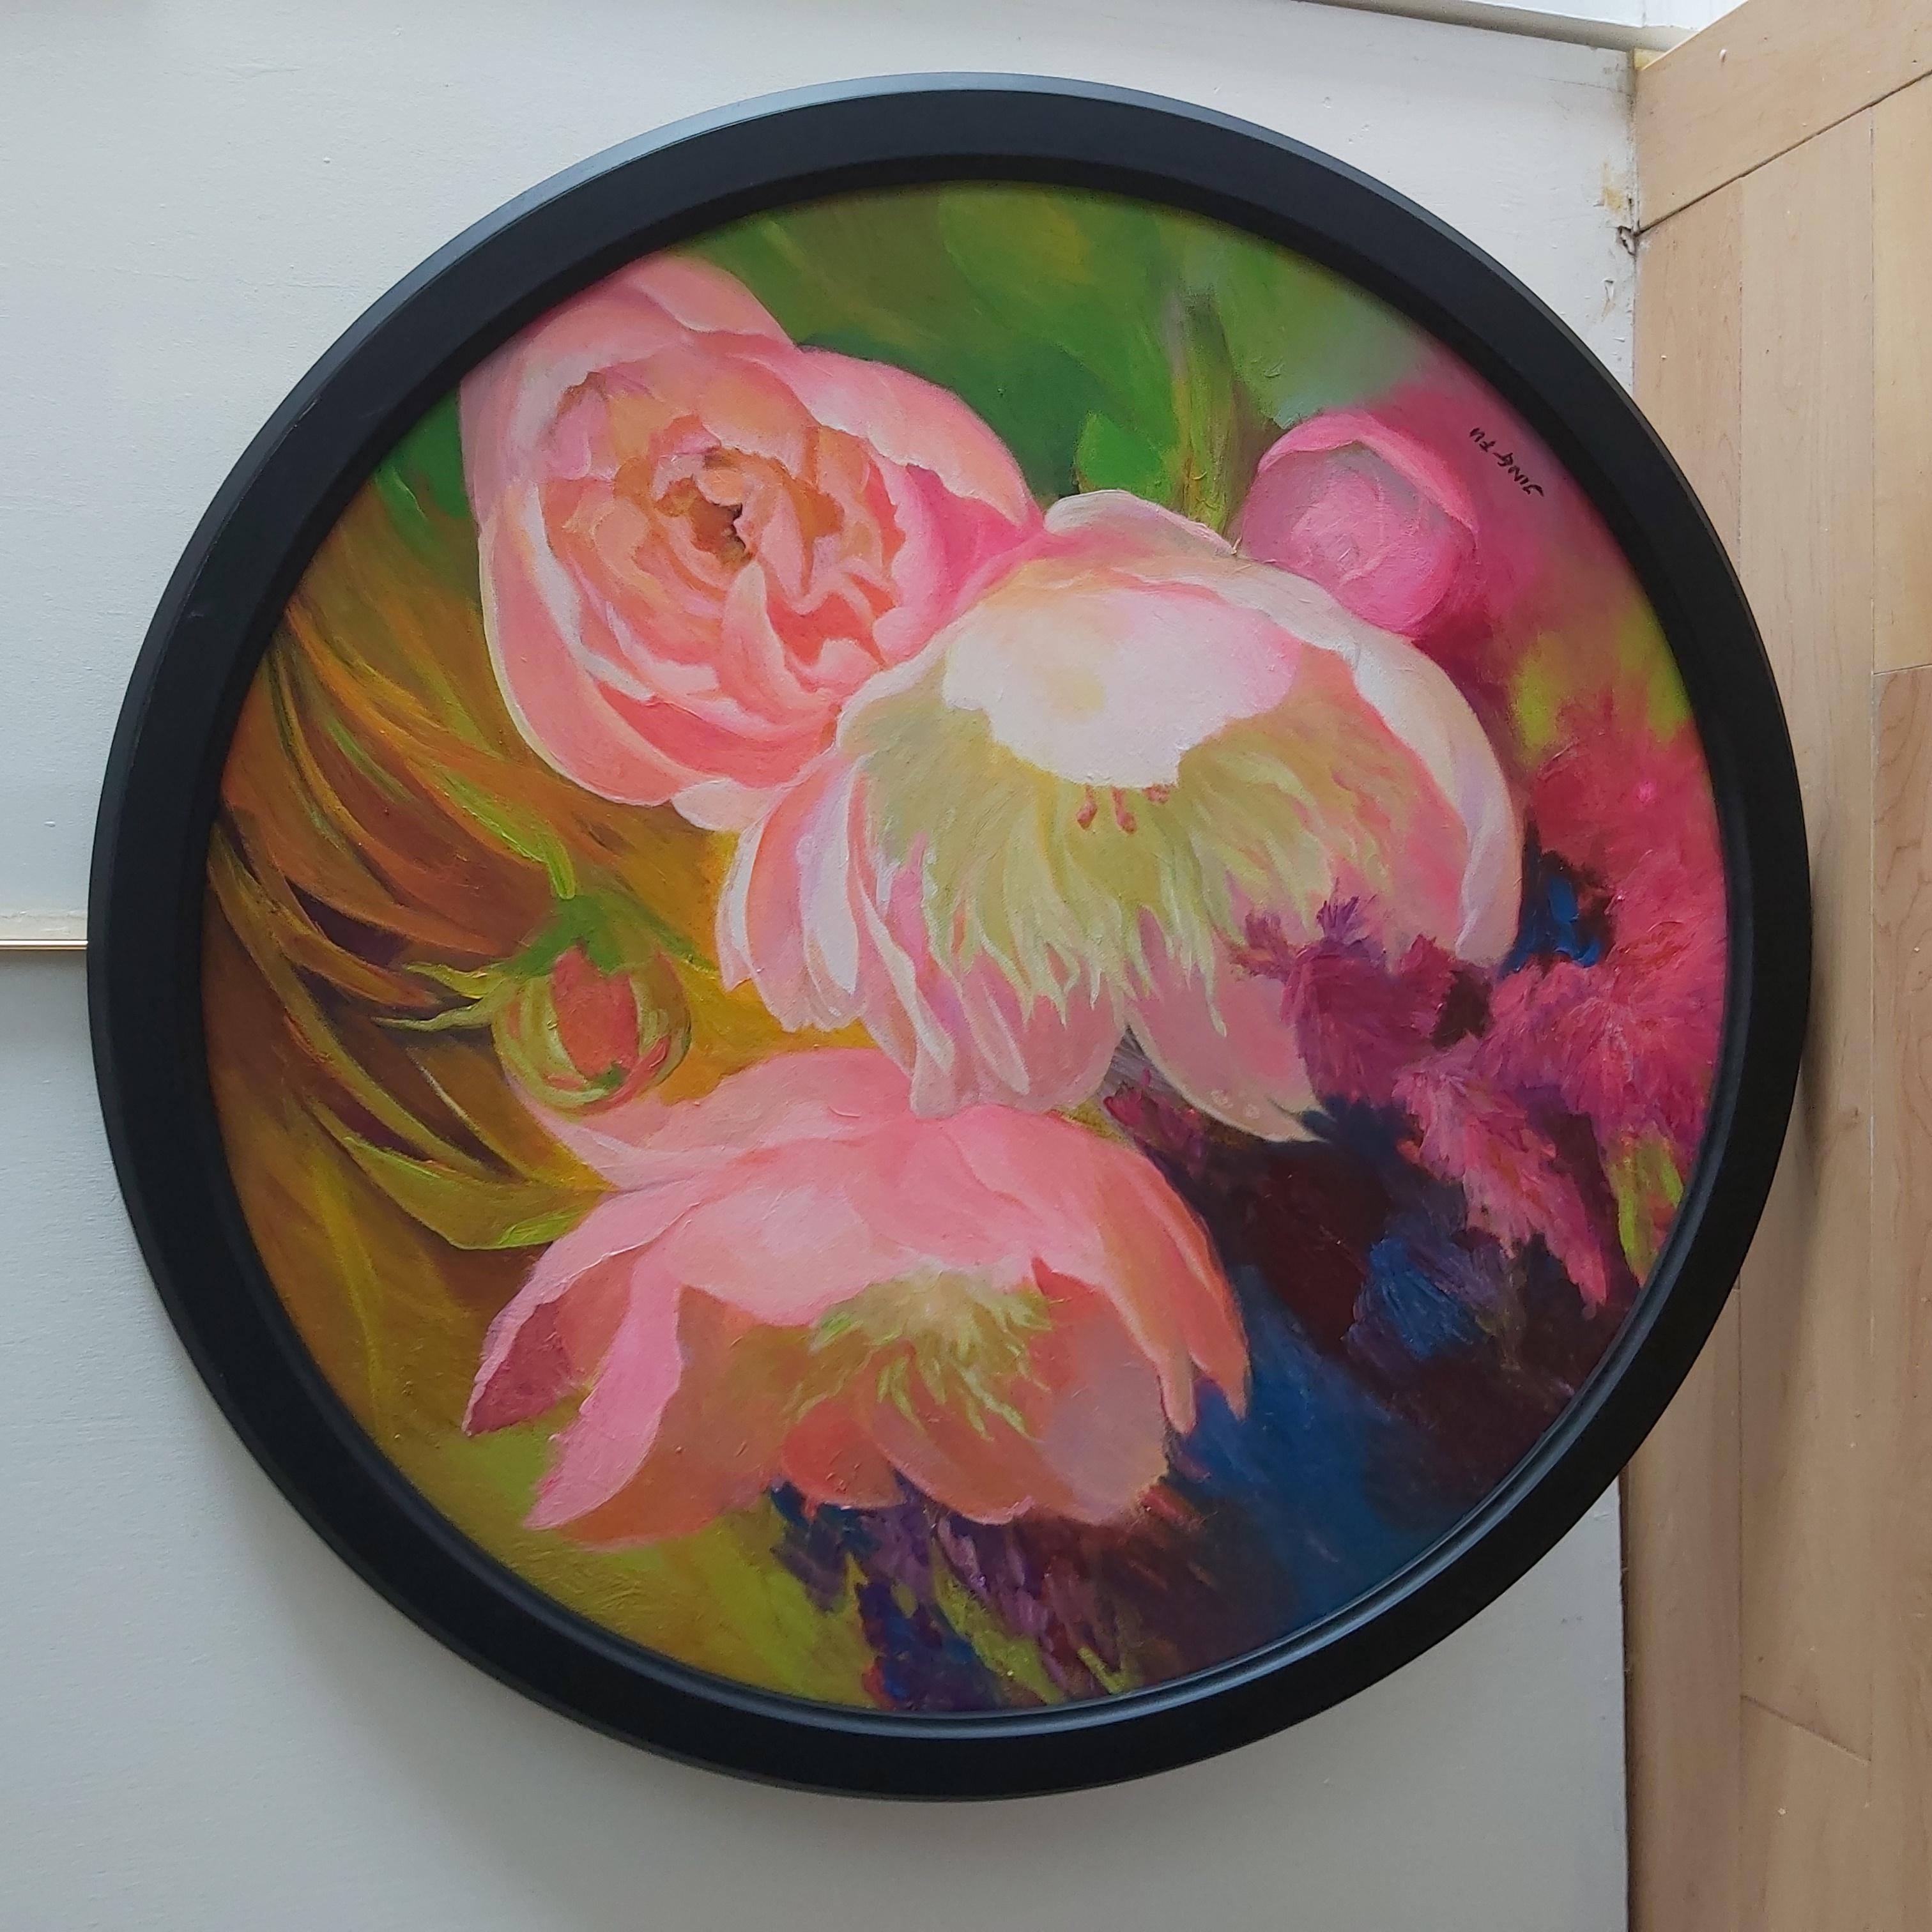 Spring Call is a vibrant depiction of pink flowers surrounded by colorful flora.
Comes with the black frame and ready to hang.
